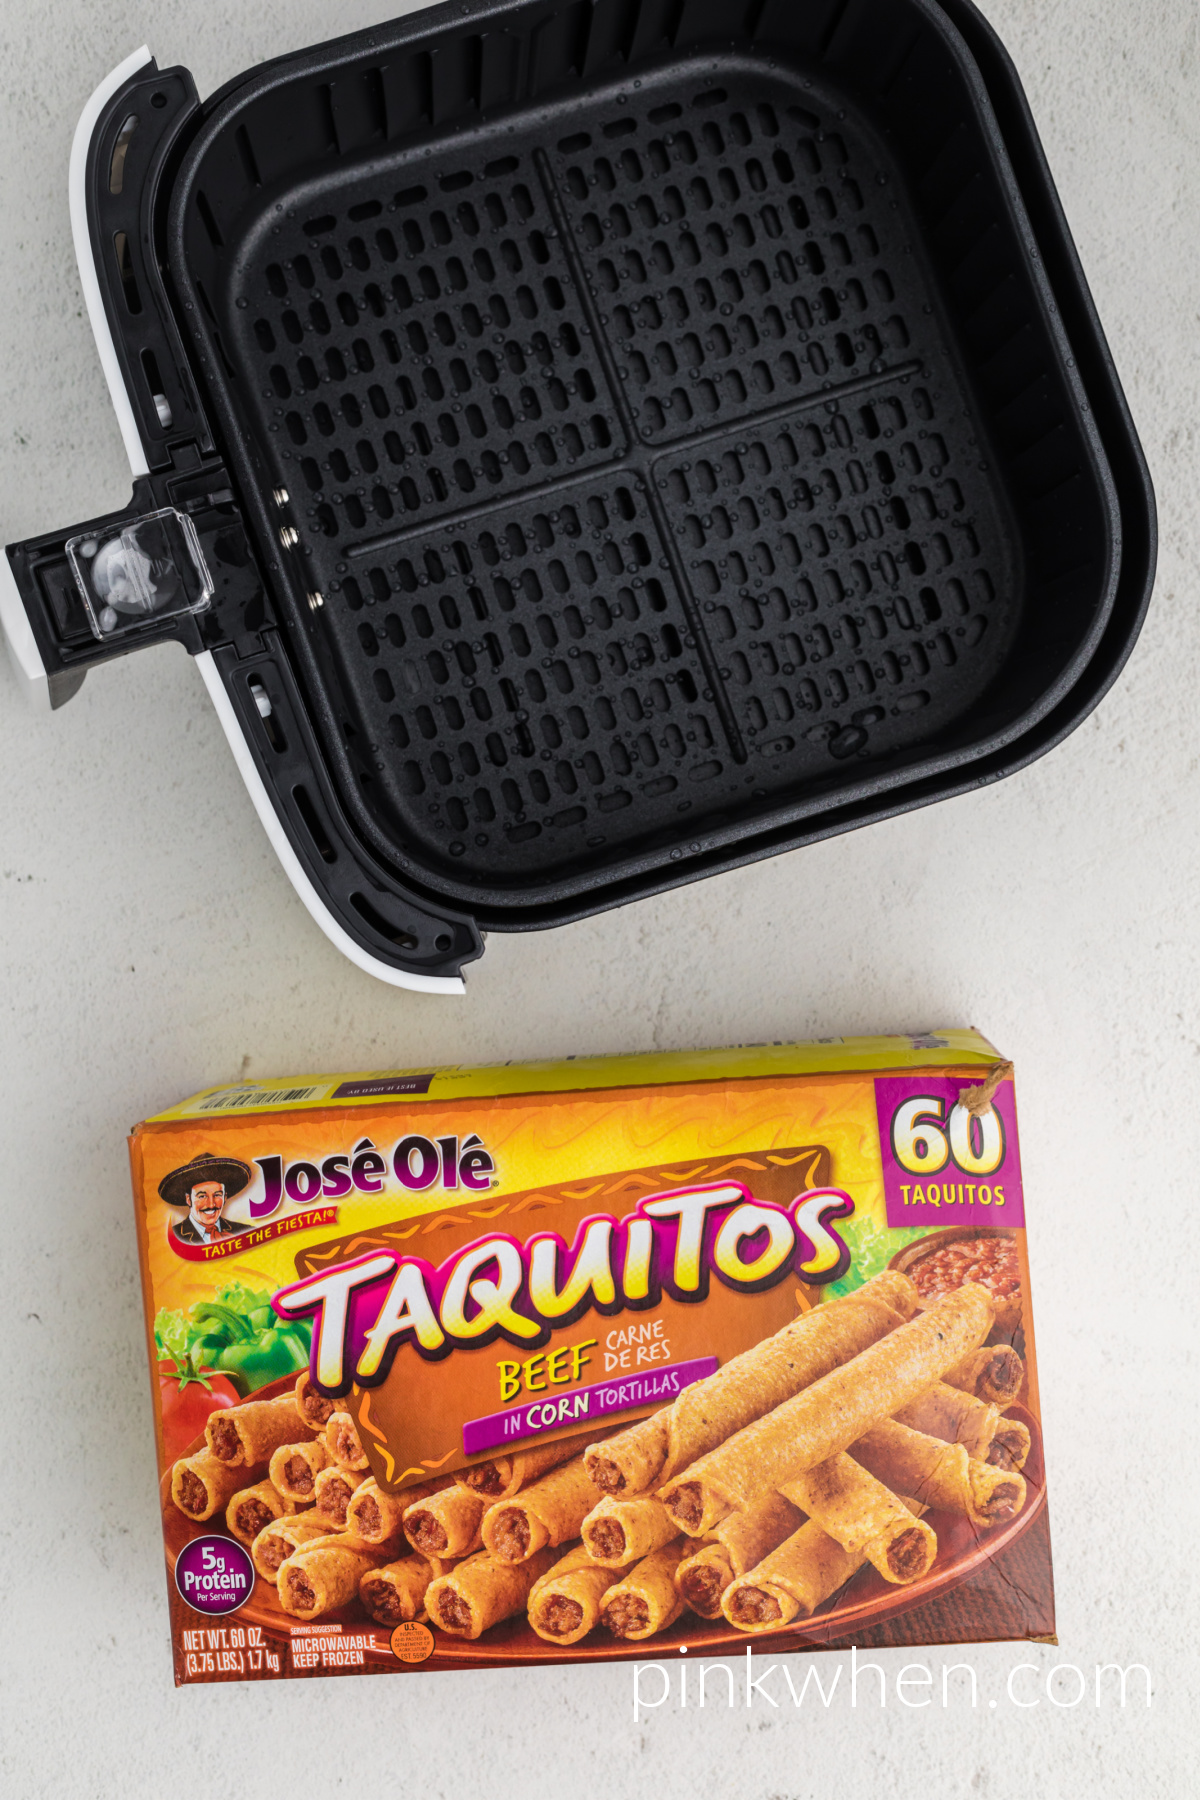 Basket of the air fryer and a box of frozen taquitos.